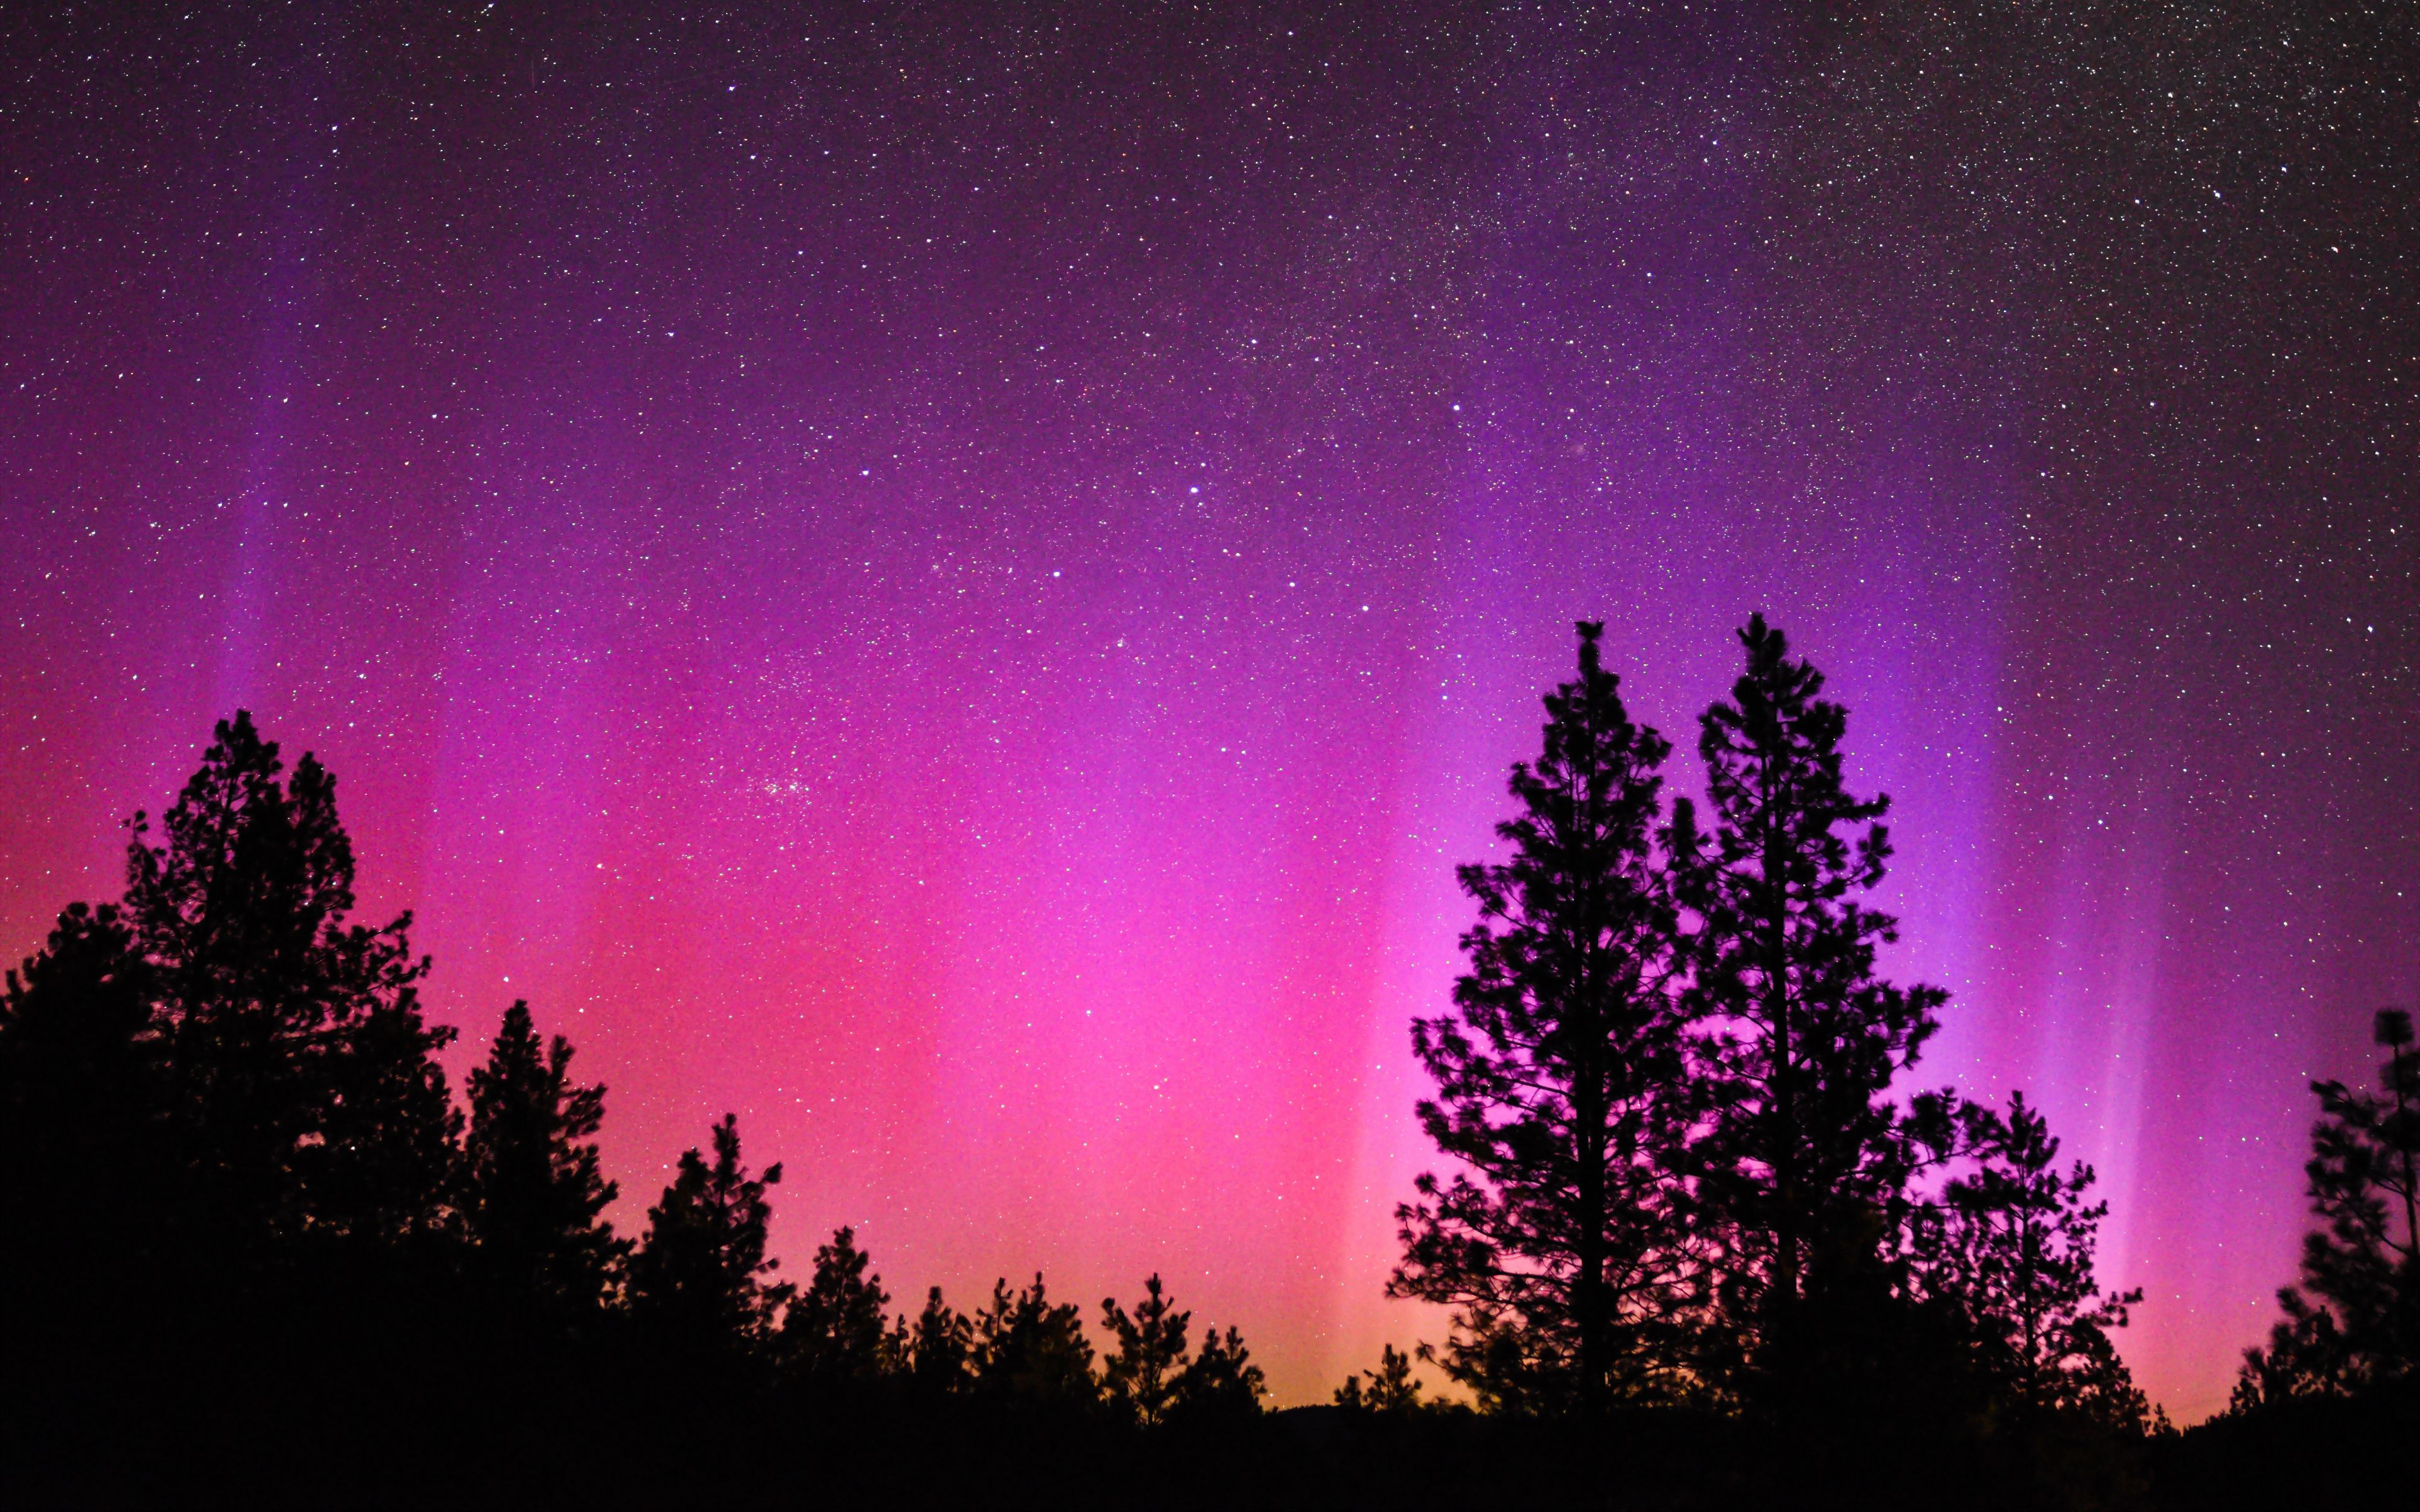 Download wallpaper 3840x2400 northern lights, starry sky, night, trees ...